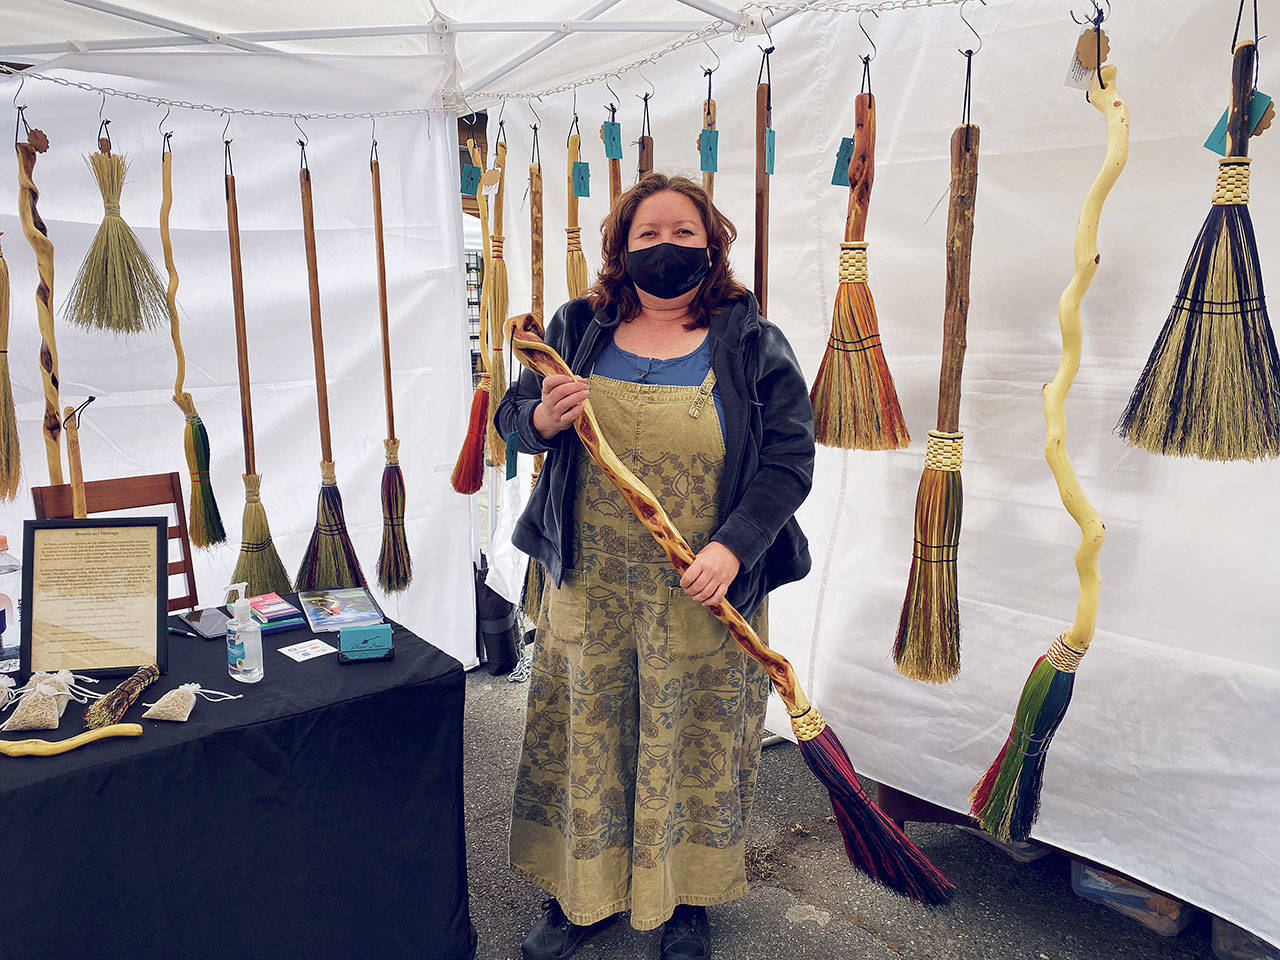 Check out Wicked Brooms, courtesy of full-time artisan broom maker Teresa Bentley, at the Sequim Farmers & Artisans Market ’s 2021 season, running through late October. Photo by Emma Jane “EJ” Garcia